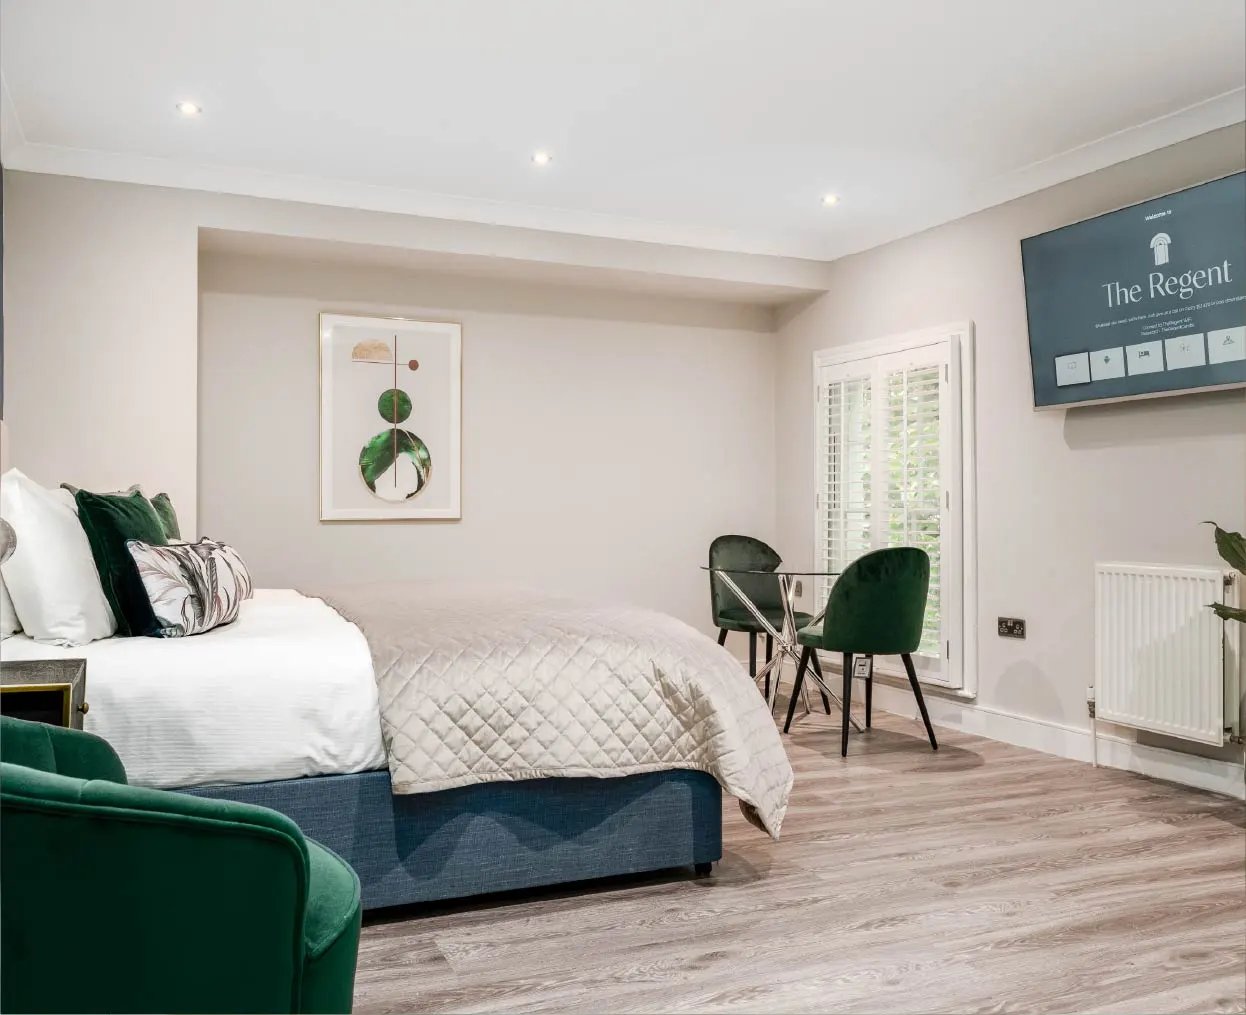 The Regent sets a new standard for tech-powered aparthotels using Mews 